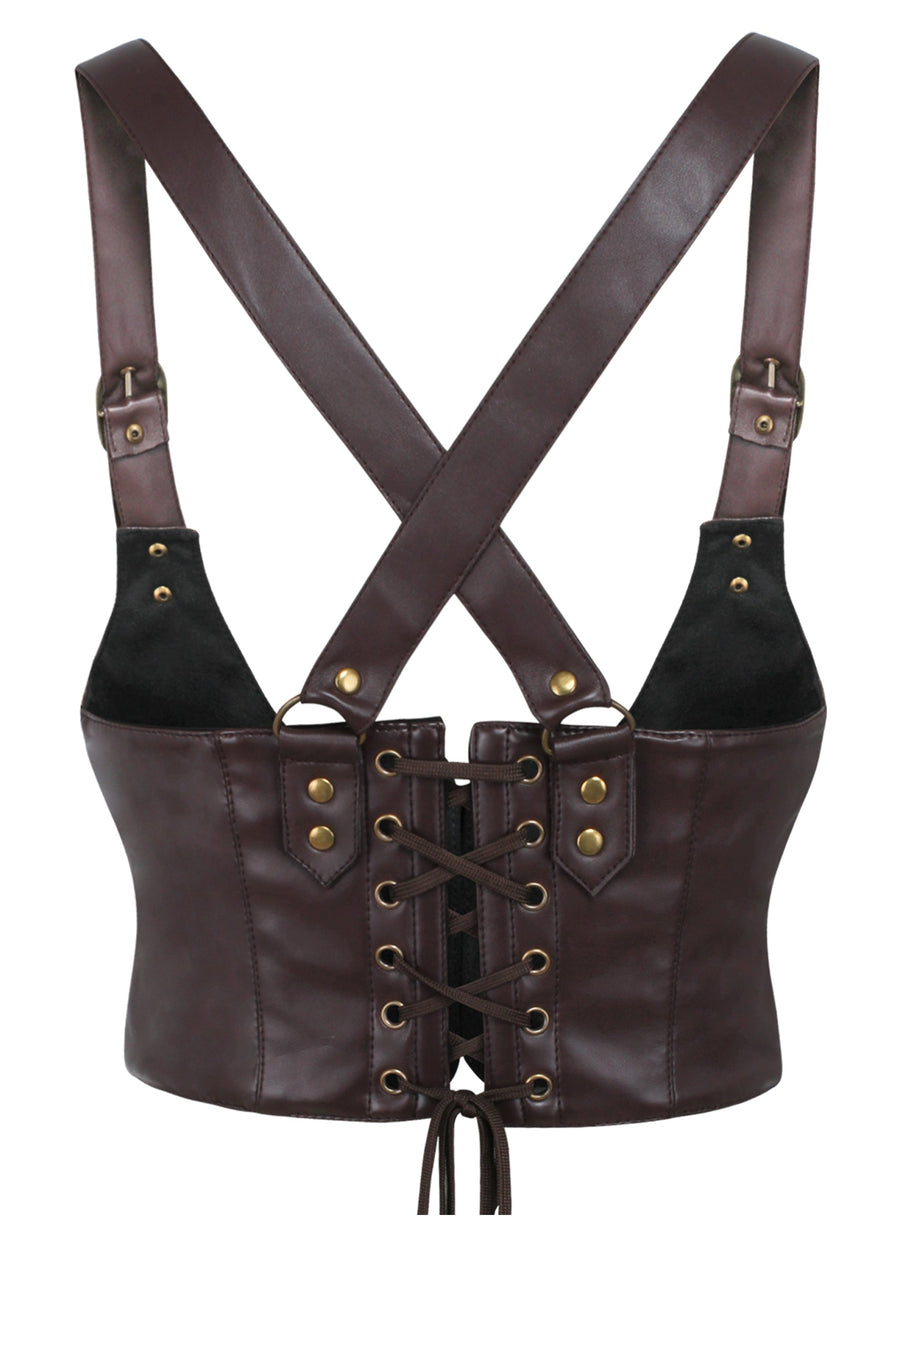 Real Leather Corsets - Authentic Steel-boned Corsets USA